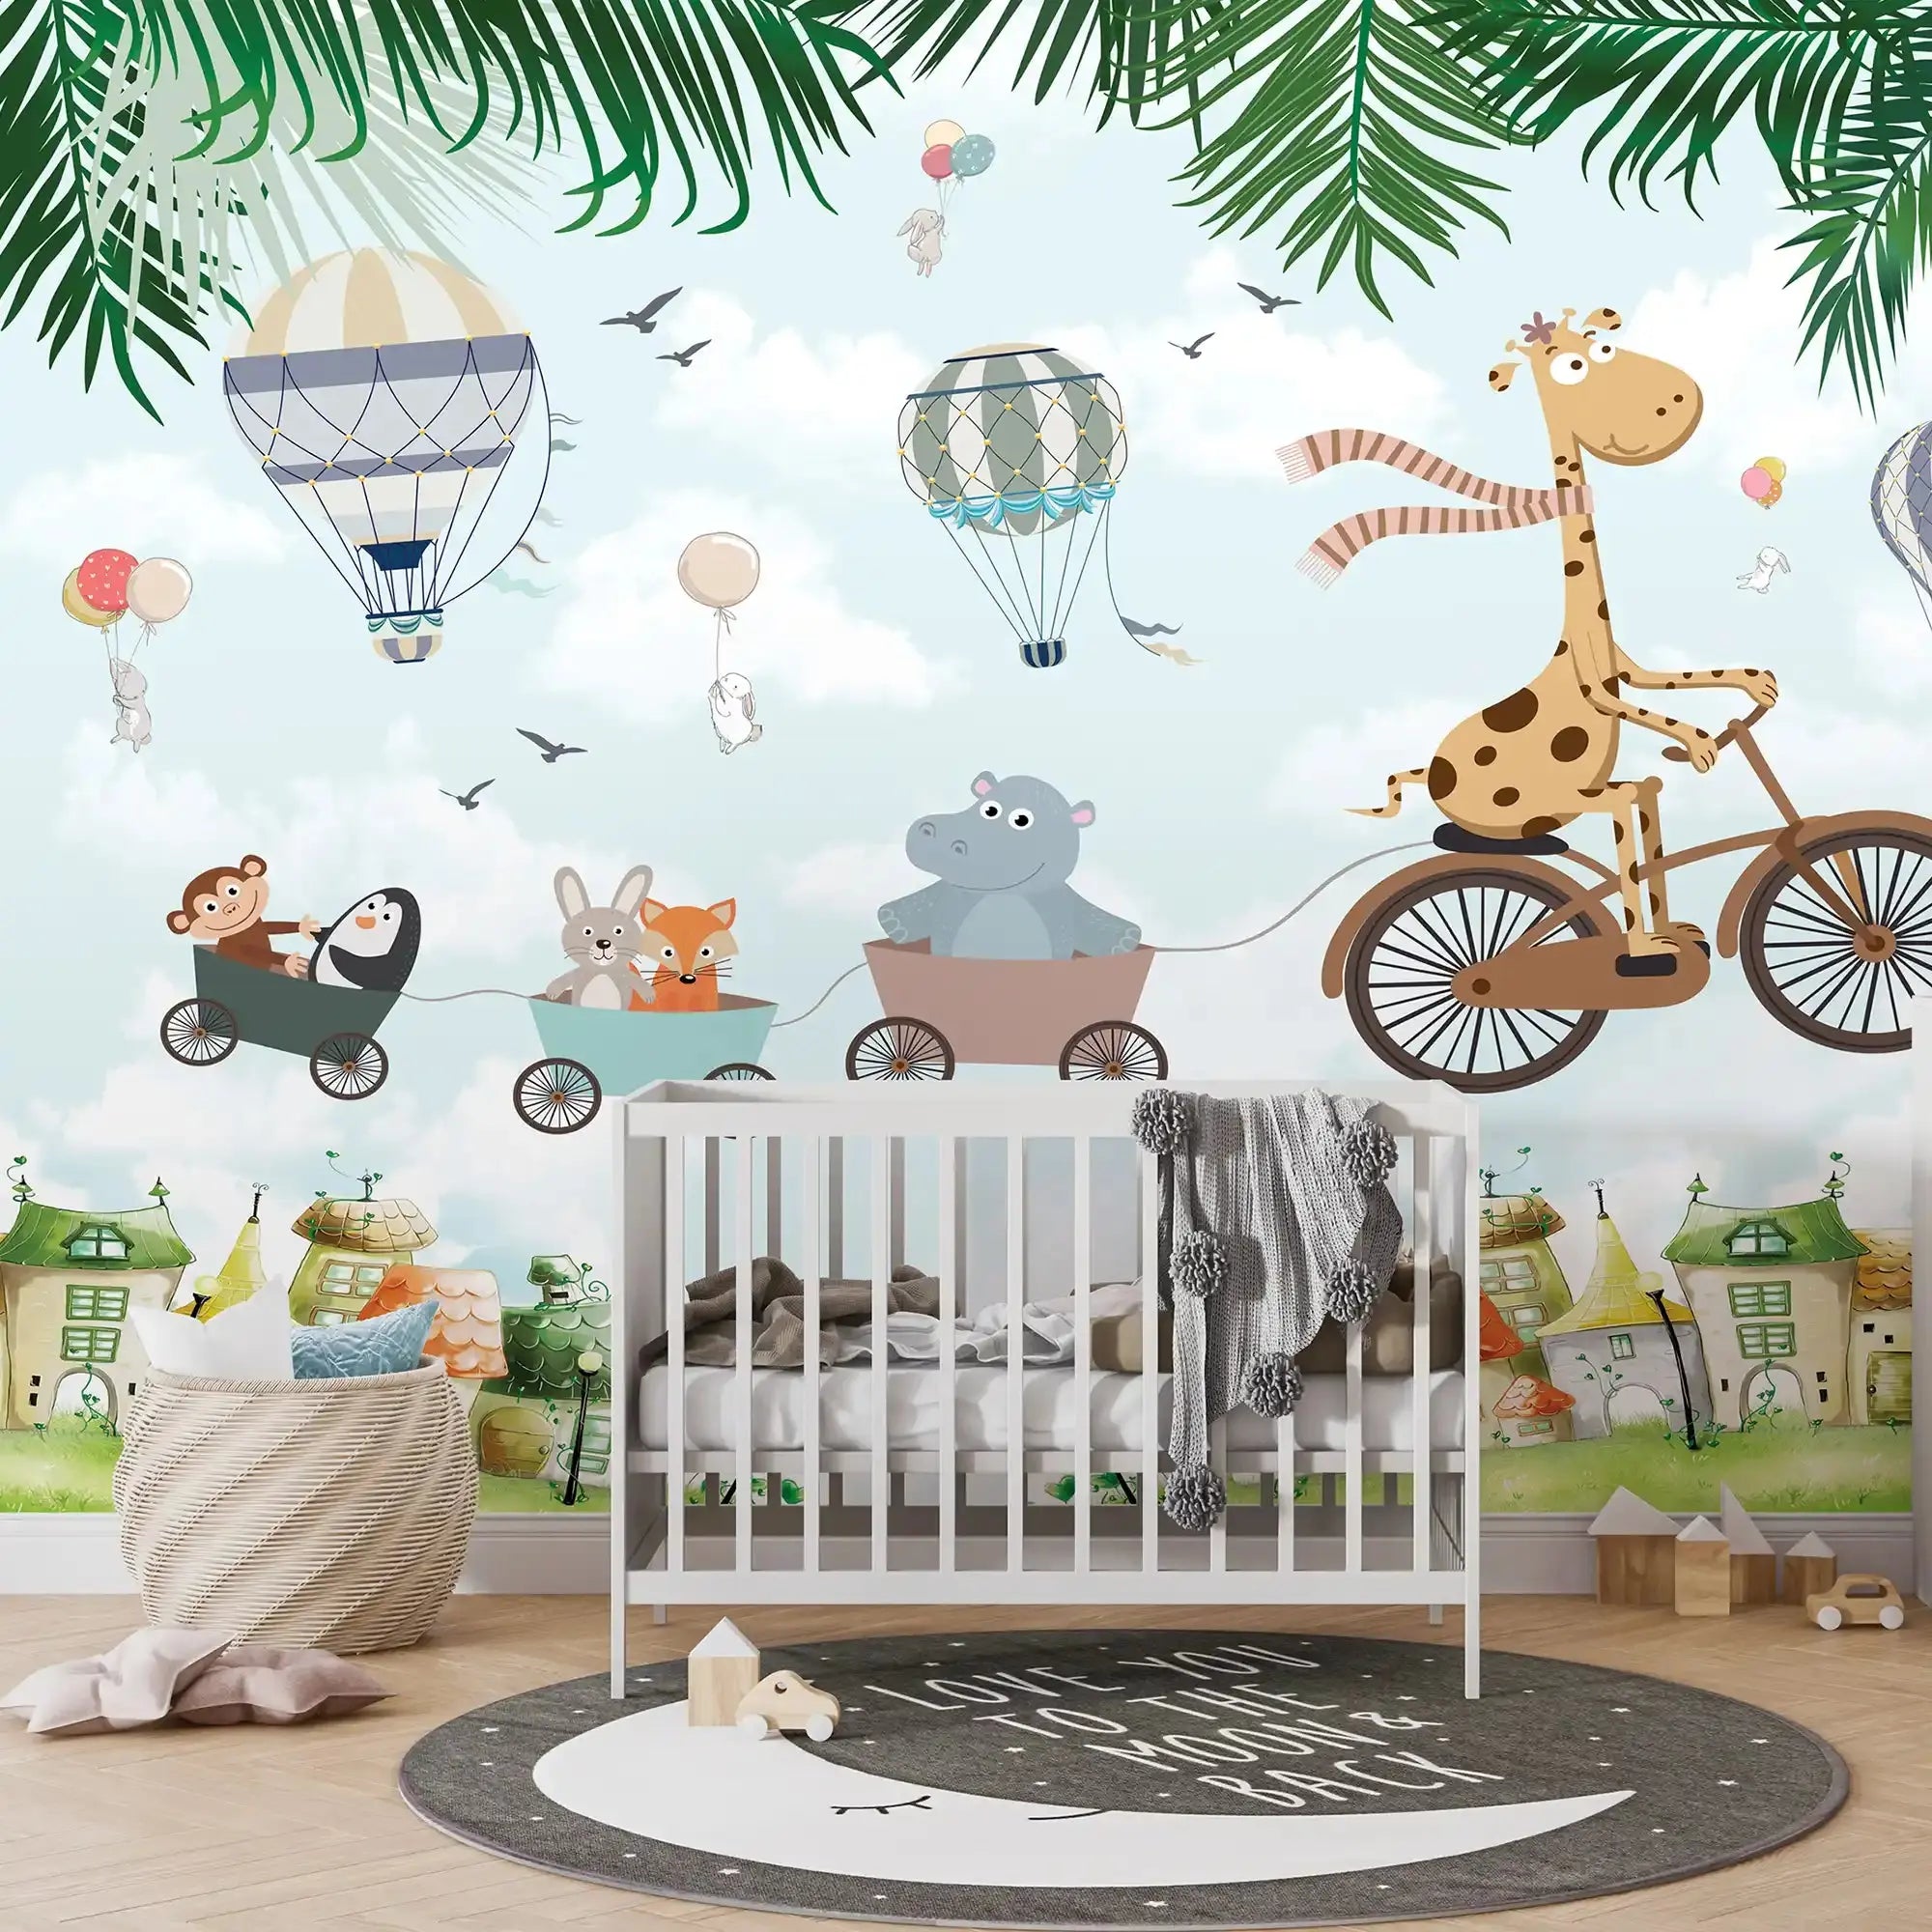 6021 / Peel and Stick Nursery Wallpaper with Colorful Animal Illustration for Kids Bedroom Decor and Playroom Wall Decals - Artevella